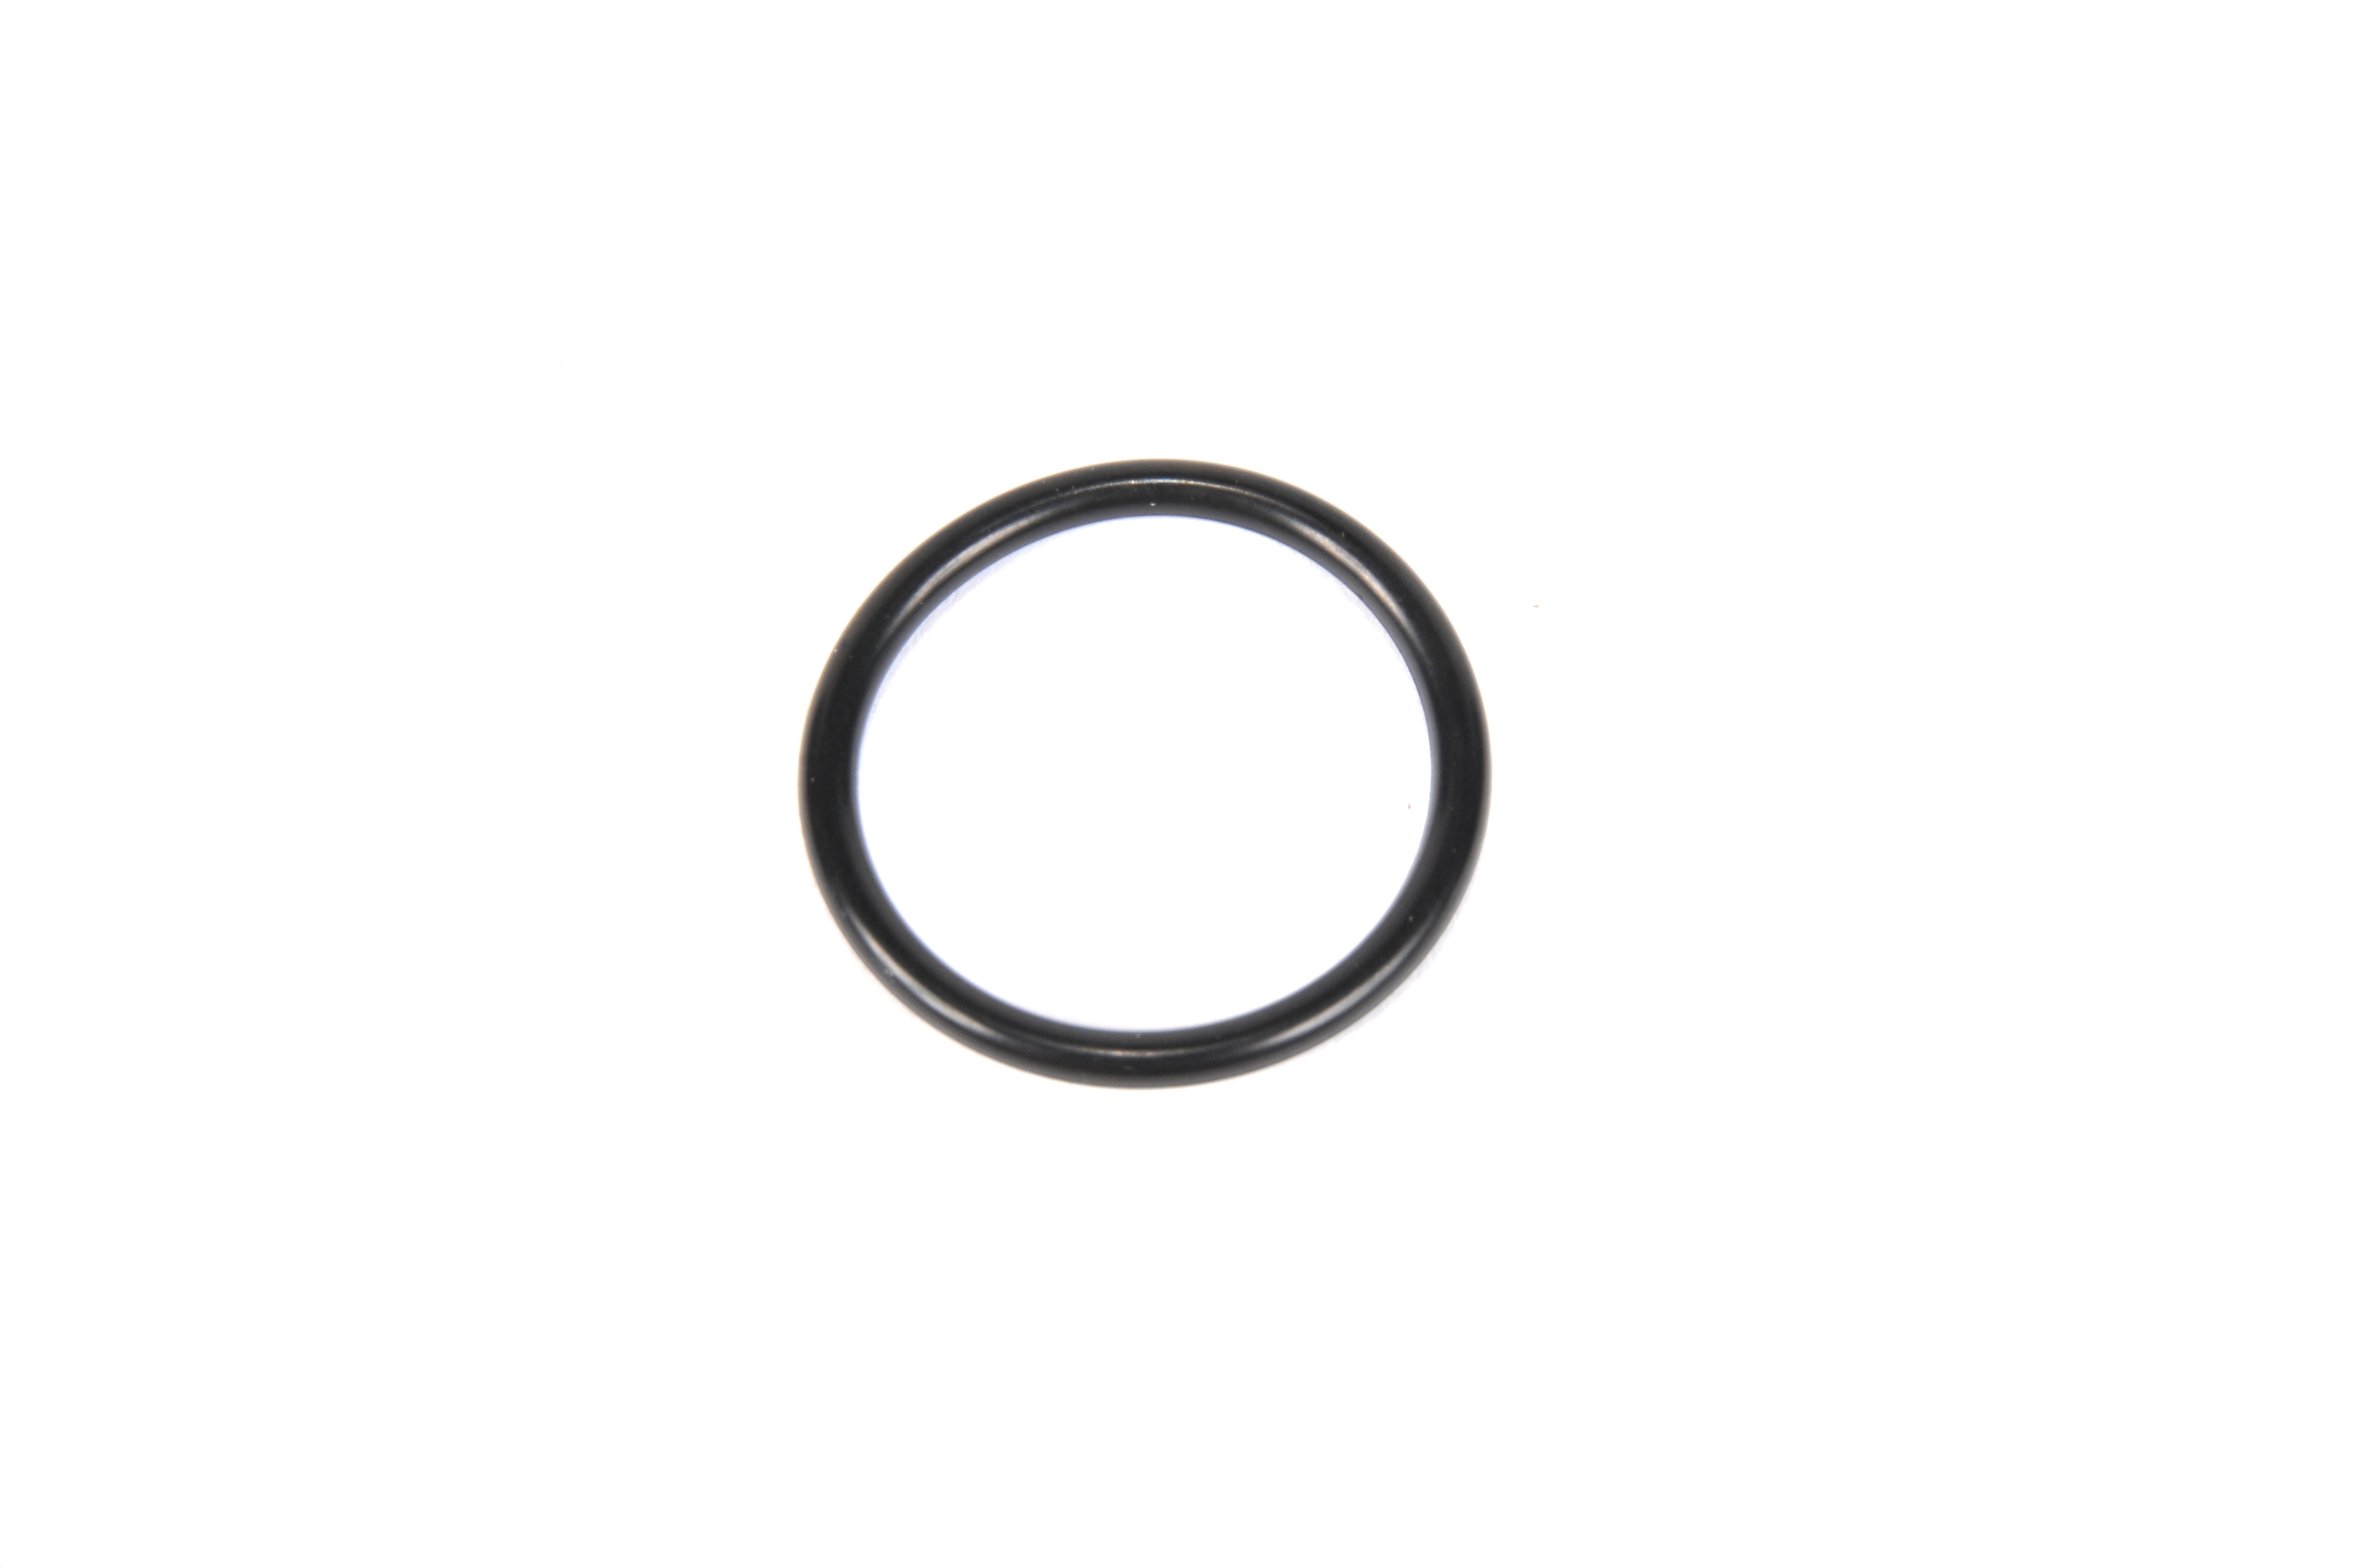 GM GENUINE PARTS - Automatic Transmission Filter O-Ring - GMP 25194694